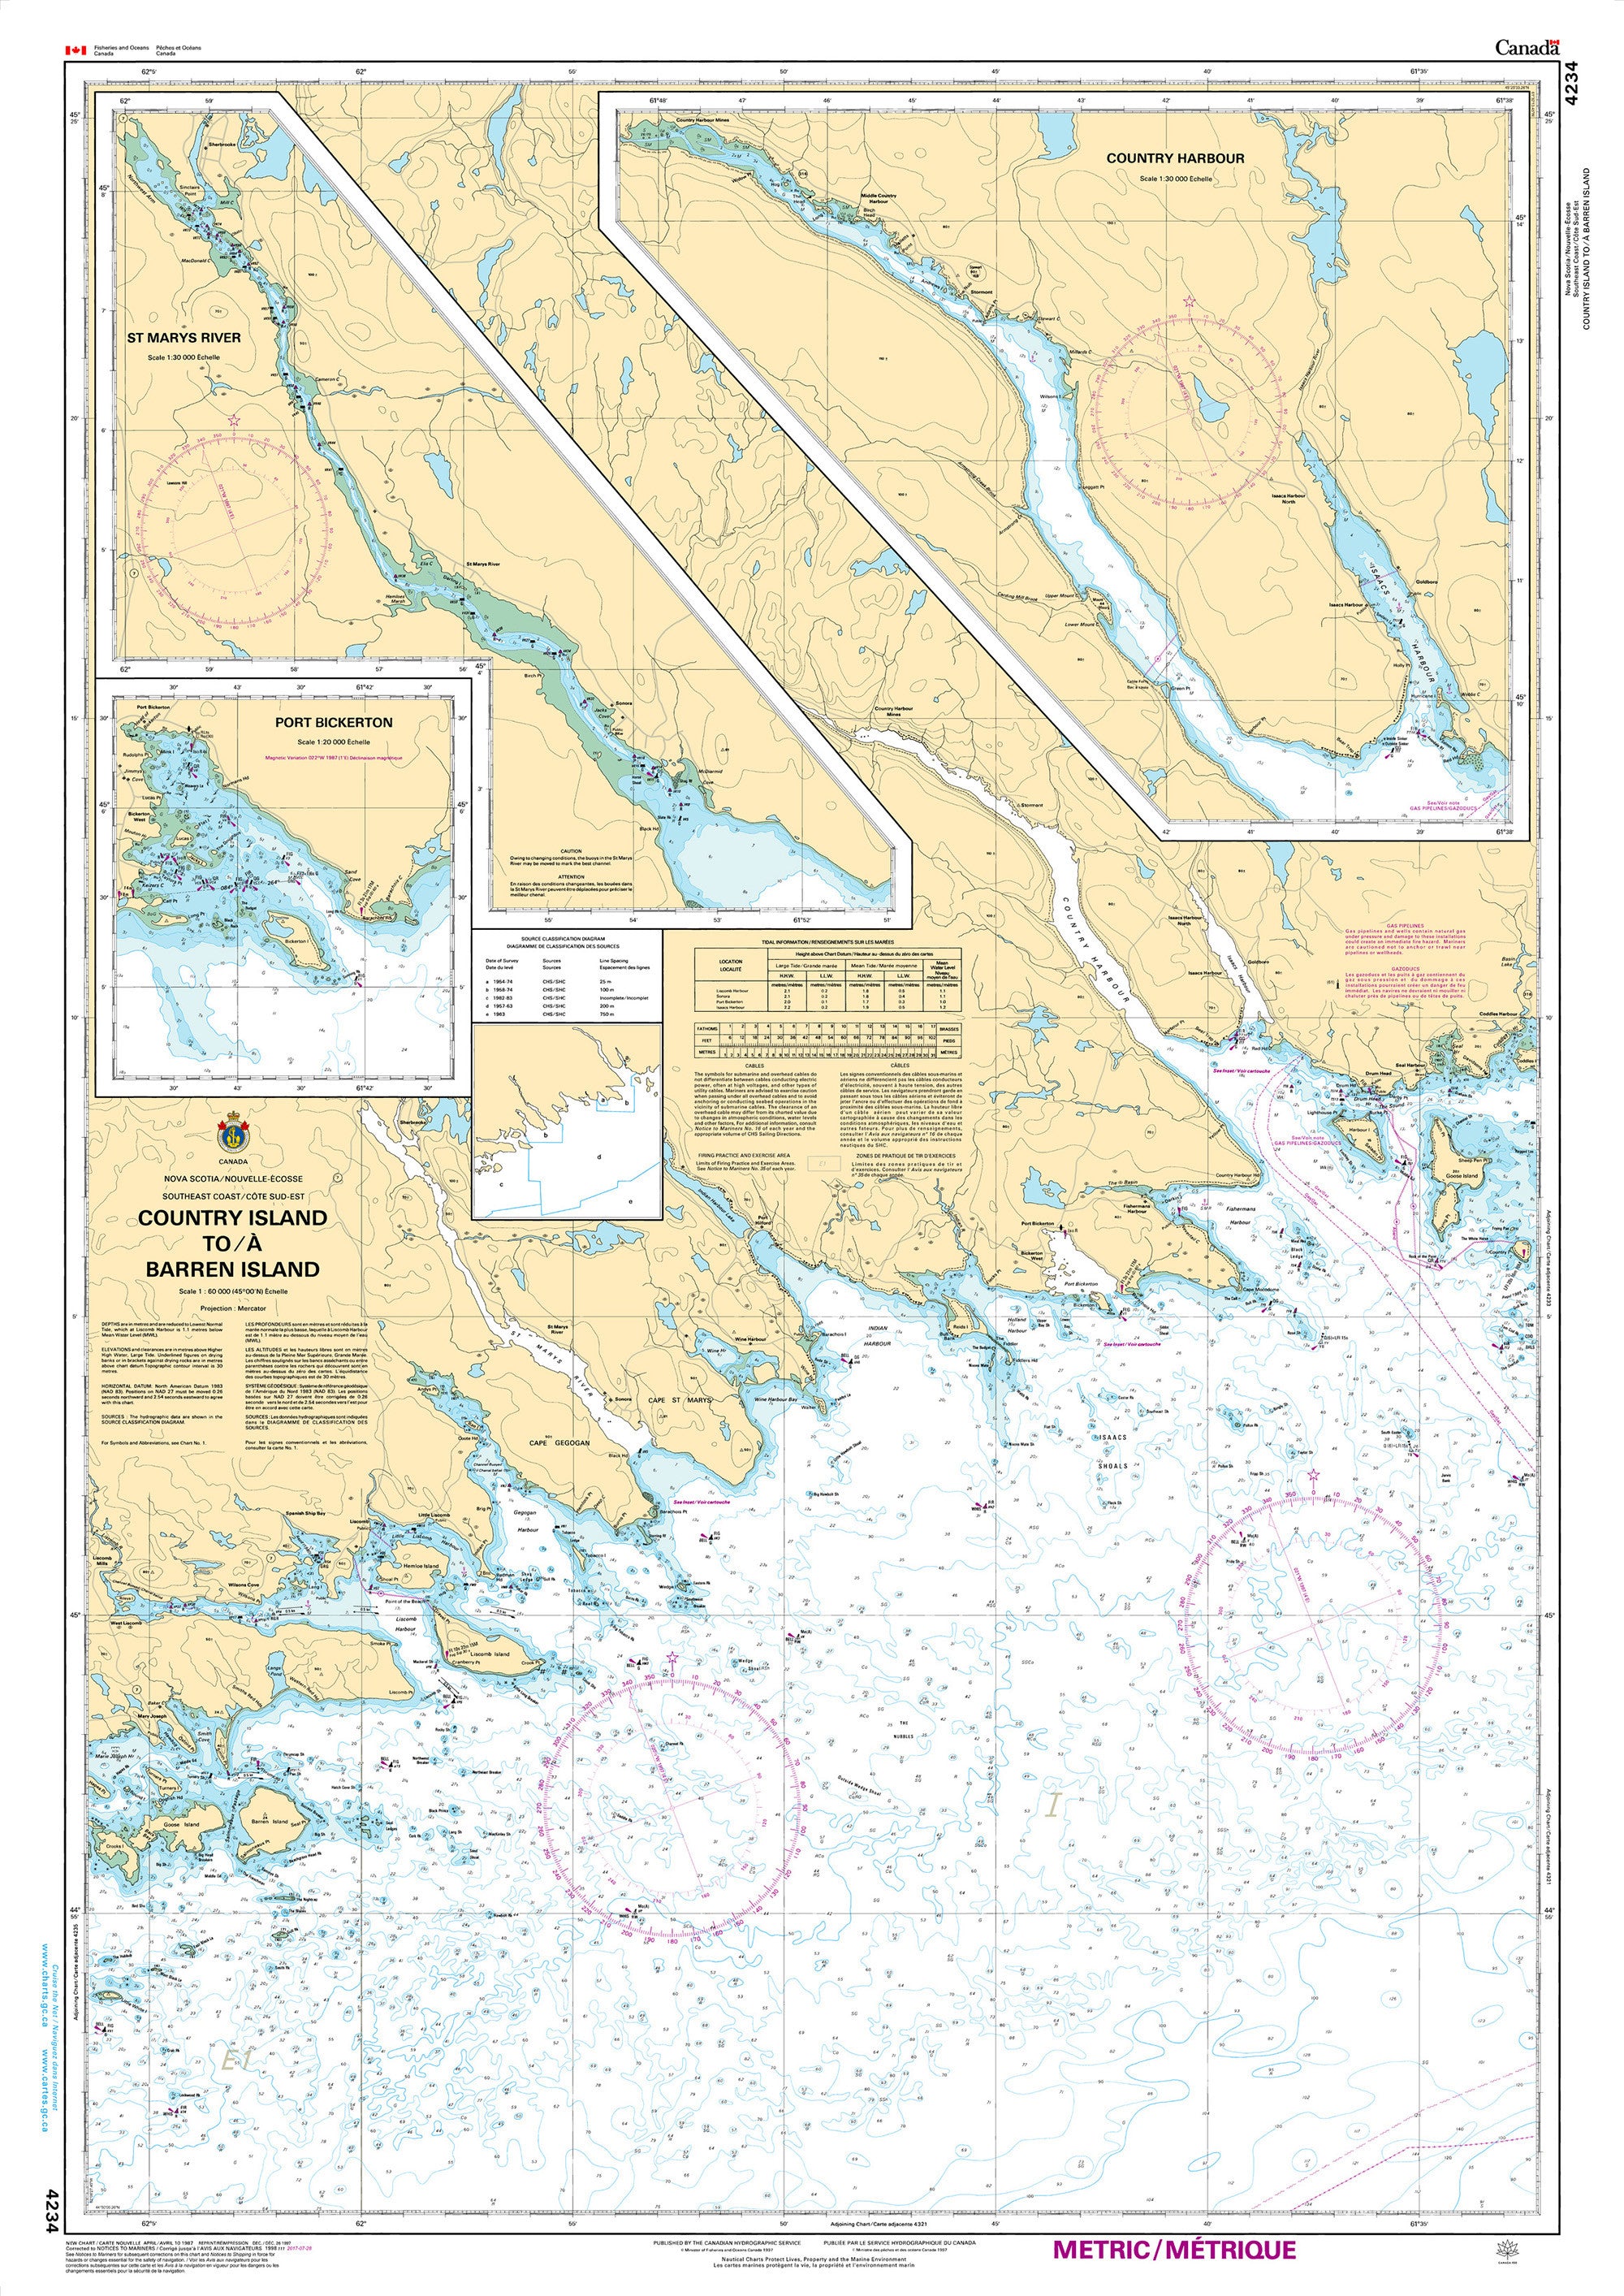 Canadian Hydrographic Service Nautical Chart CHS4234: Country Island to/à Barren Island